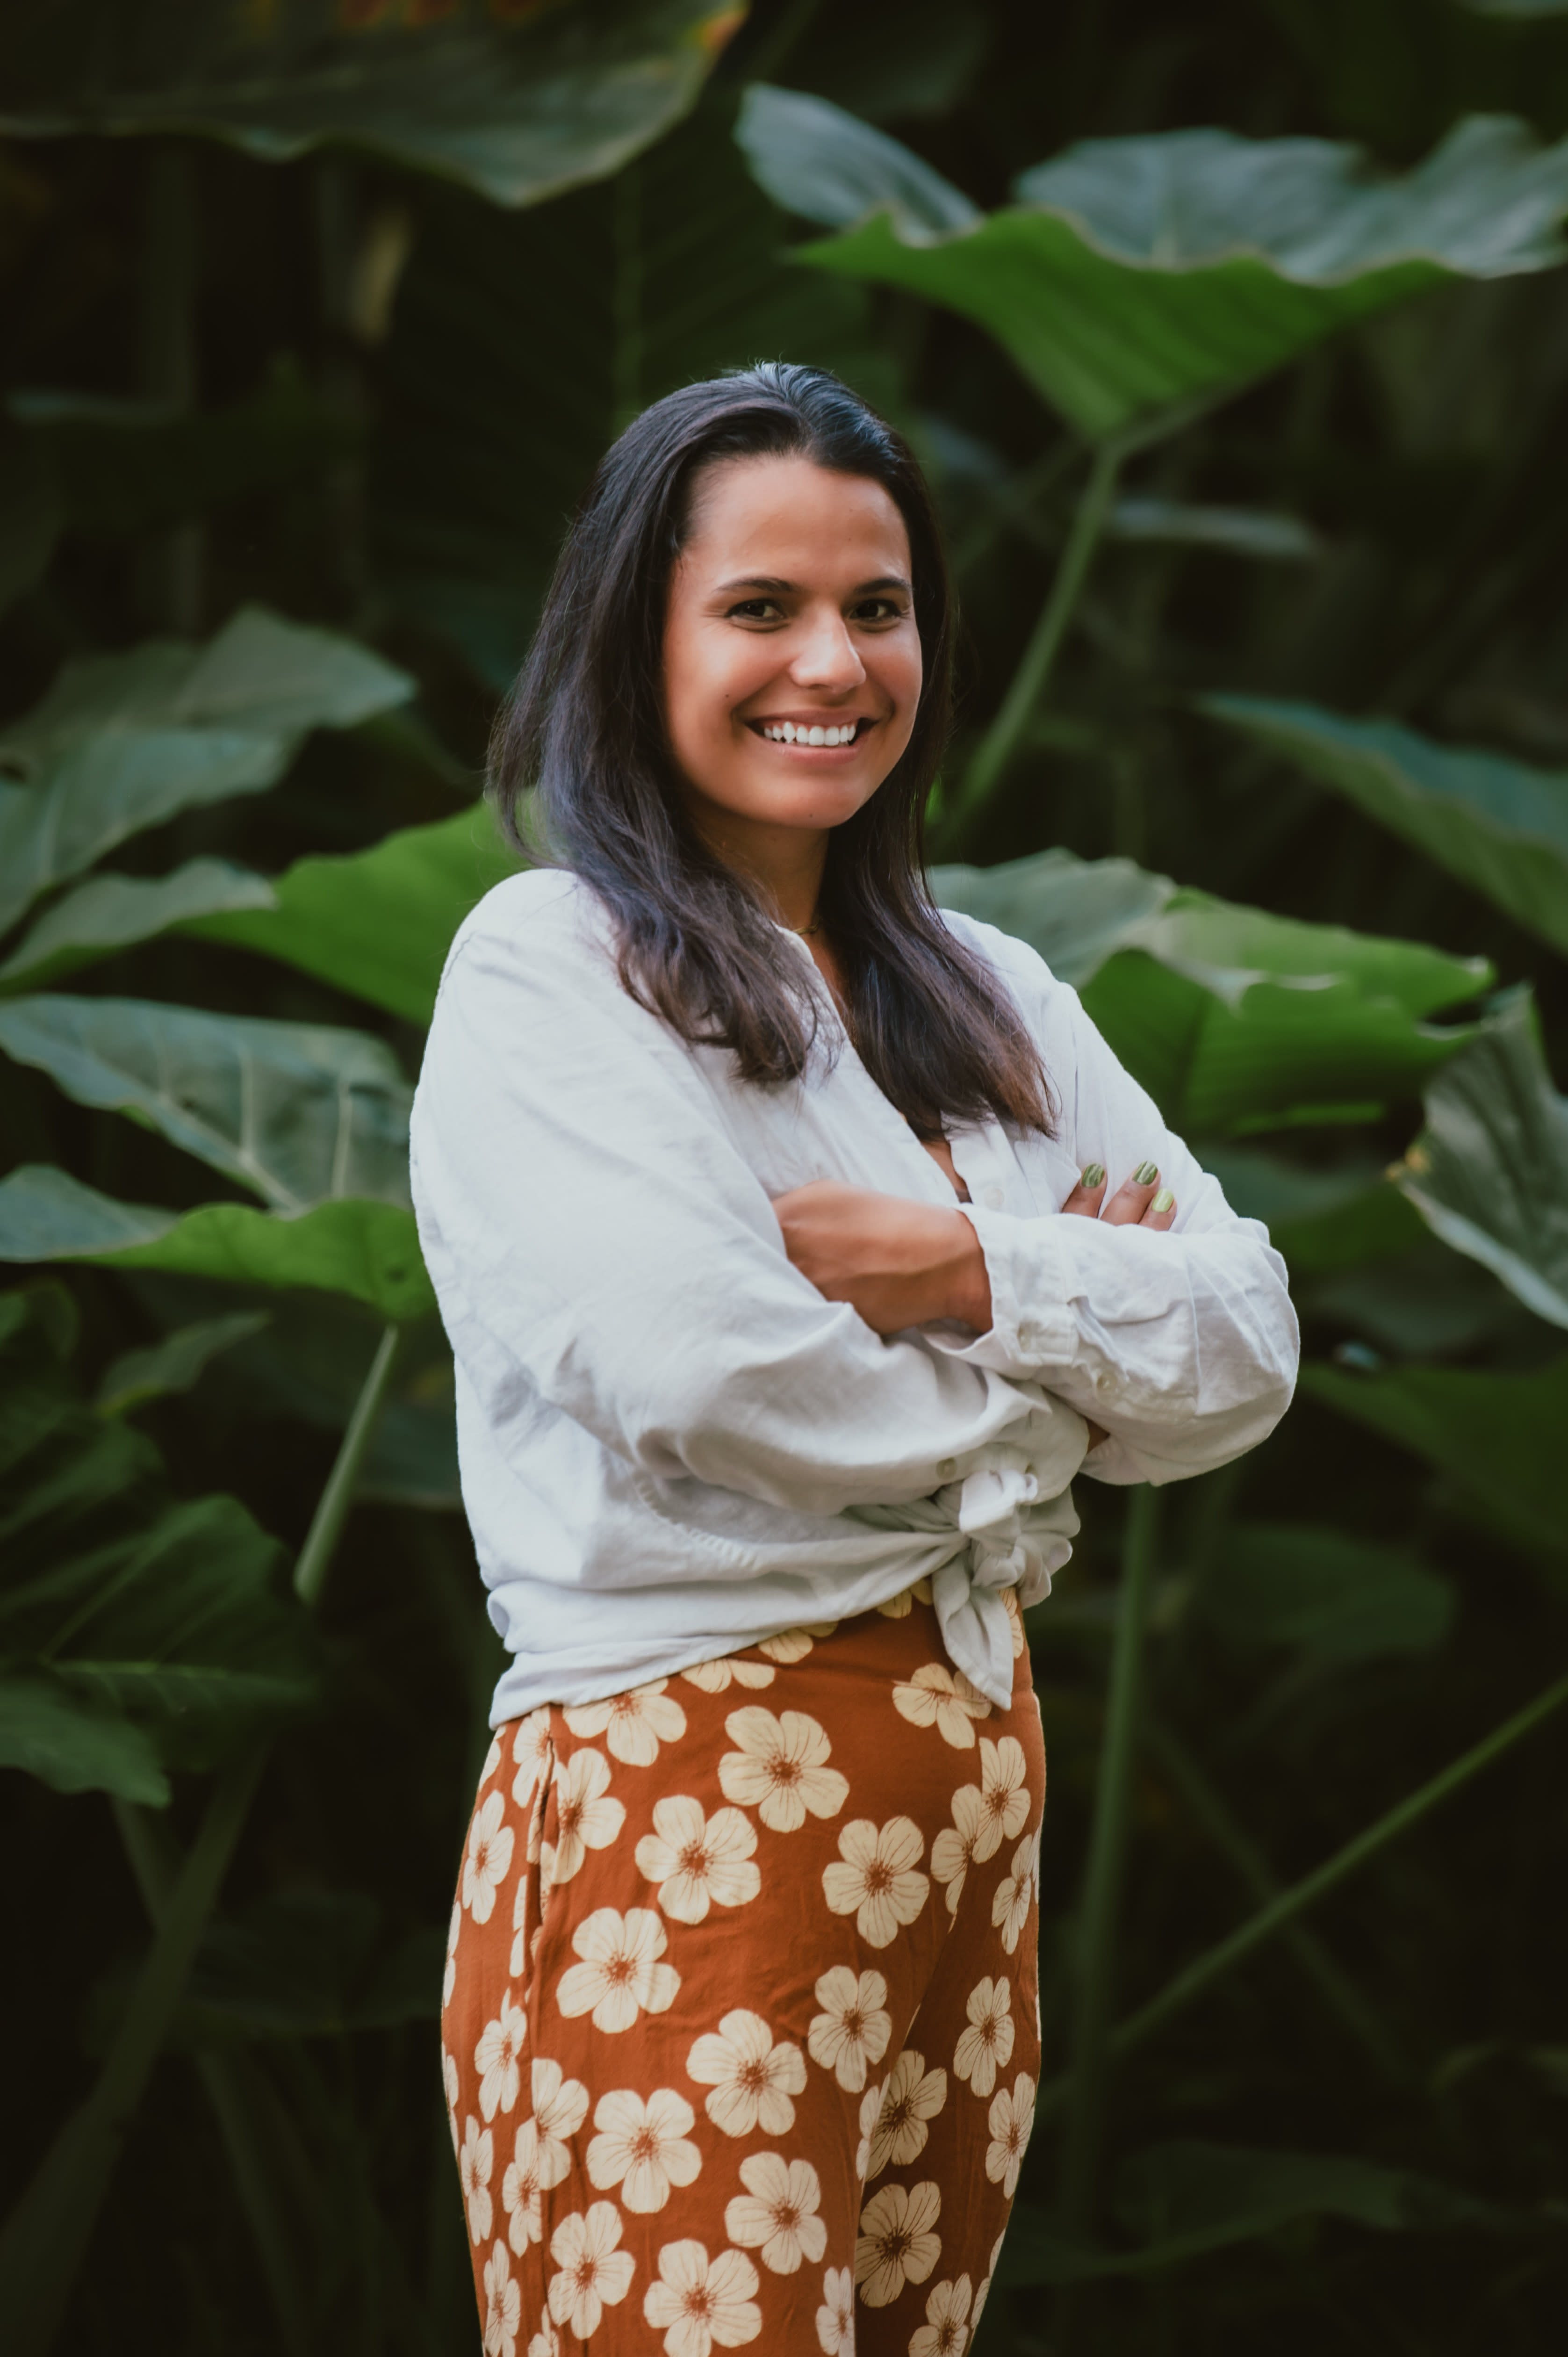 31-year-old started her CBD business from home in Hawaii—in 2022, it brought in $100K